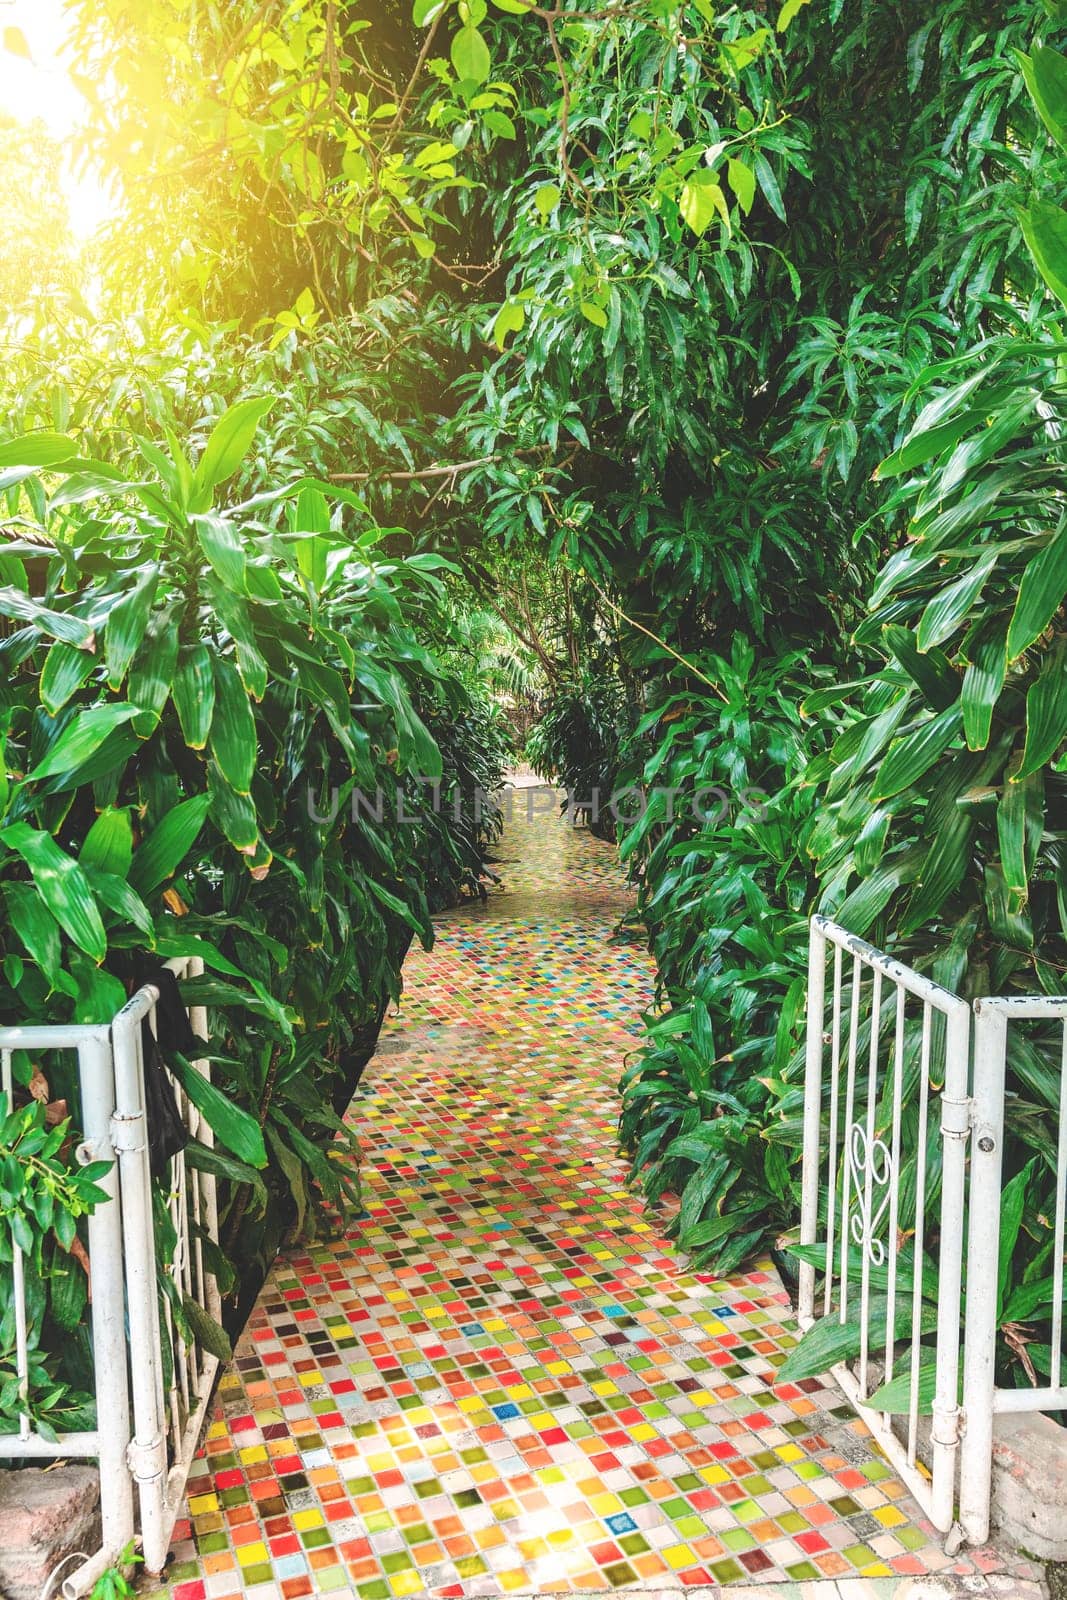 Beautiful concrete path in a home garden surrounded by plants